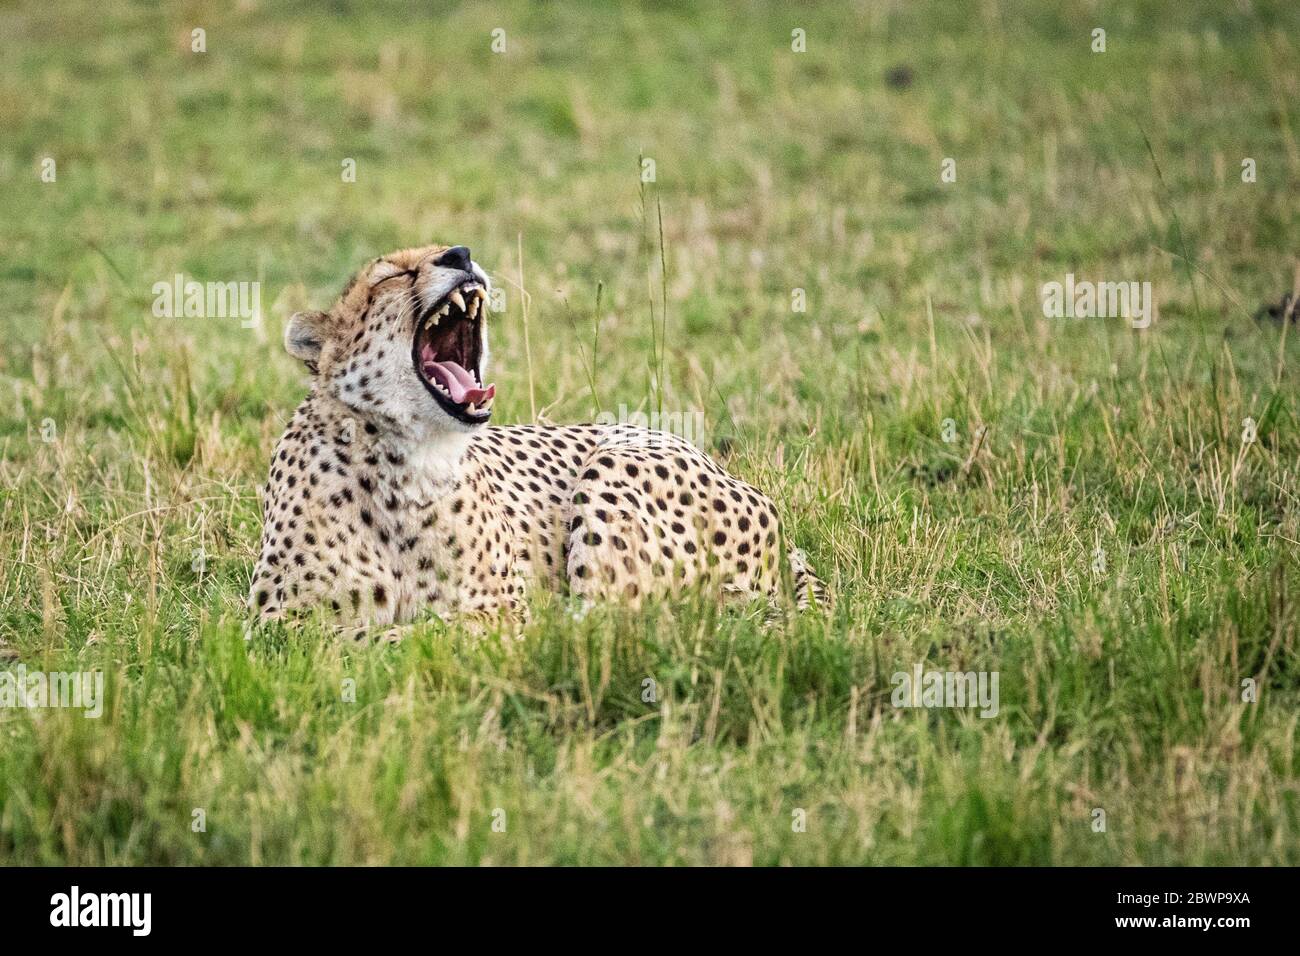 Tired Cheetah Lying in grass of Kenya, Africa mouth open wide to yawn Stock Photo